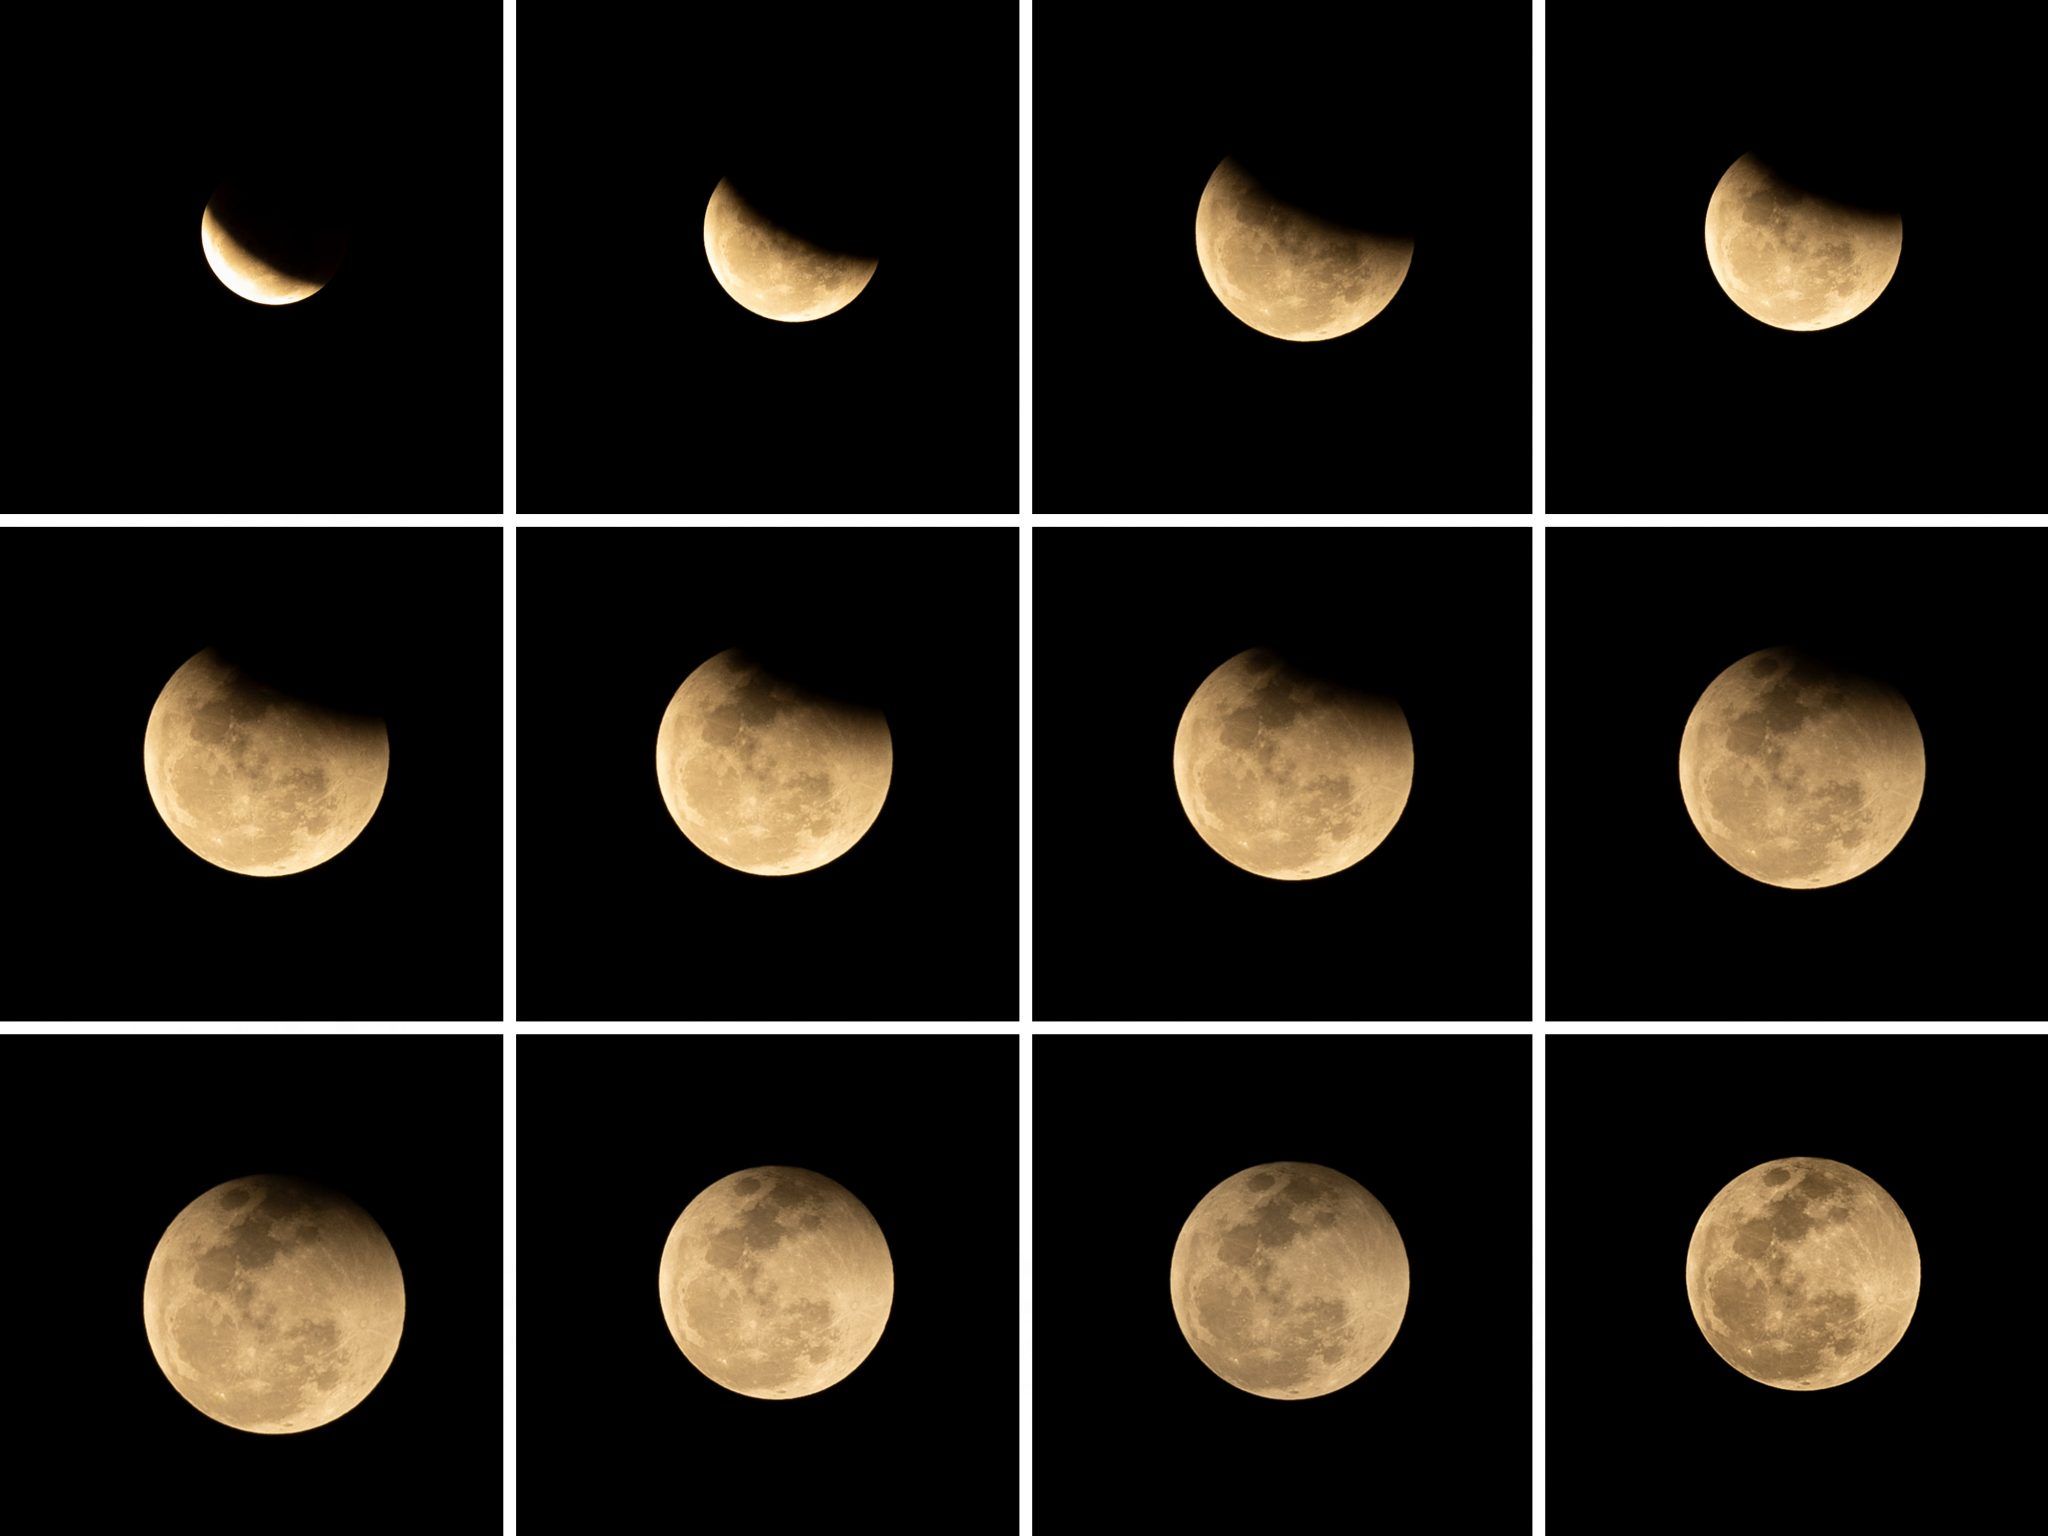 SURABAYA, INDONESIA - MAY 26: In this composite image the moon is seen as it emerges from a total lunar eclipse on May 26, 2021 in Surabaya, Indonesia. The moon will pass through Earth's shadow during this Super Blood Moon. Red light passes through the Earth's atmosphere while blue light is filtered out, causing the moon to appear red. The moon will also reach perigee or the closest point to Earth in its current orbit, making it appear larger to the eye than a regular full moon. (Photo by Robertus Pudyanto/Getty Images)